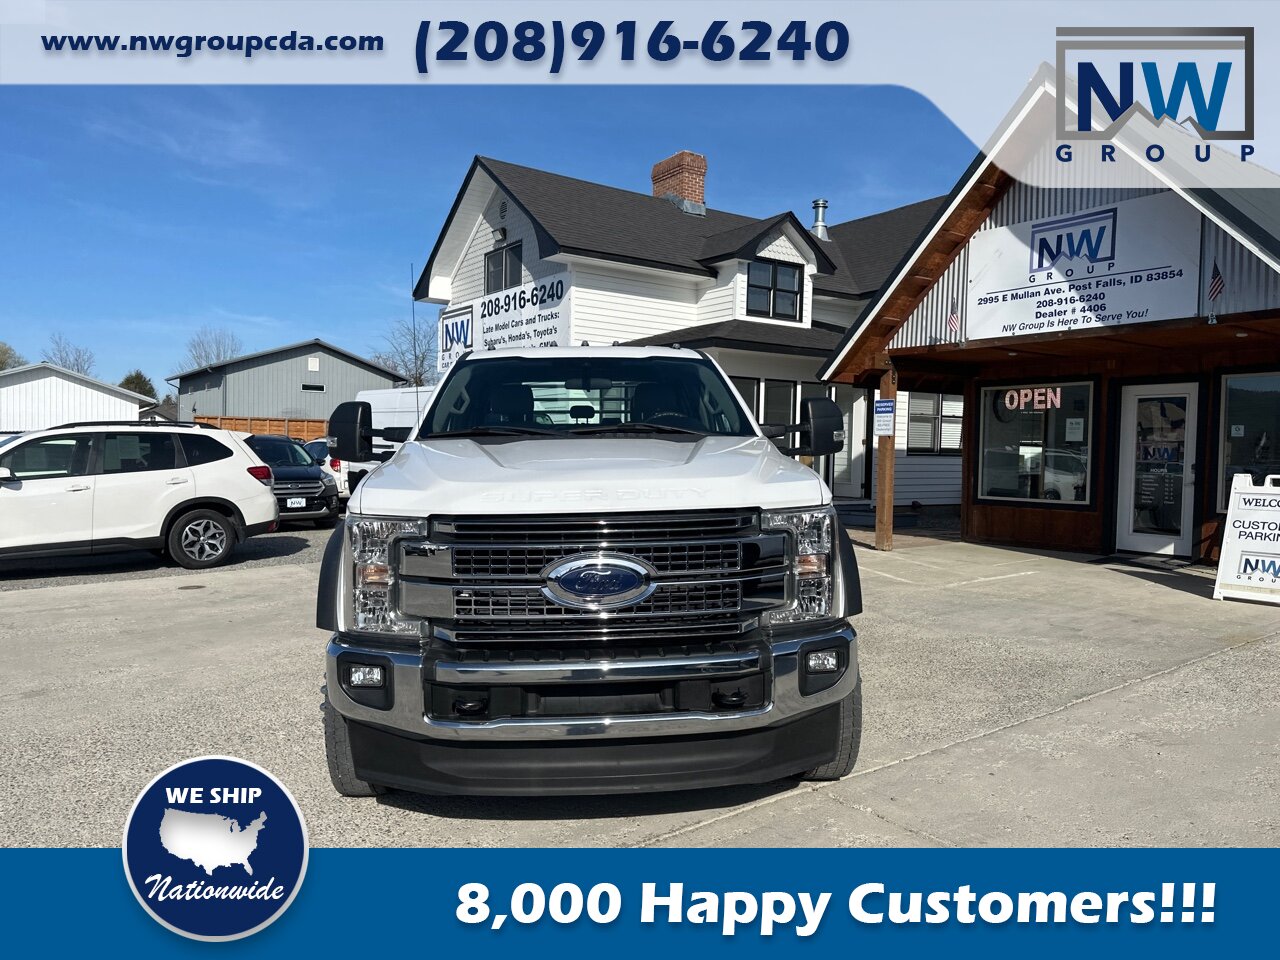 2020 Ford Commercial F-550 Super Duty F550 Chassis & Crew Cab  11.5' CM Truck Beds Aluminum Flat Bed! Heavy Duty Pick Up! Amazing Build, Only 31k miles! - Photo 3 - Post Falls, ID 83854